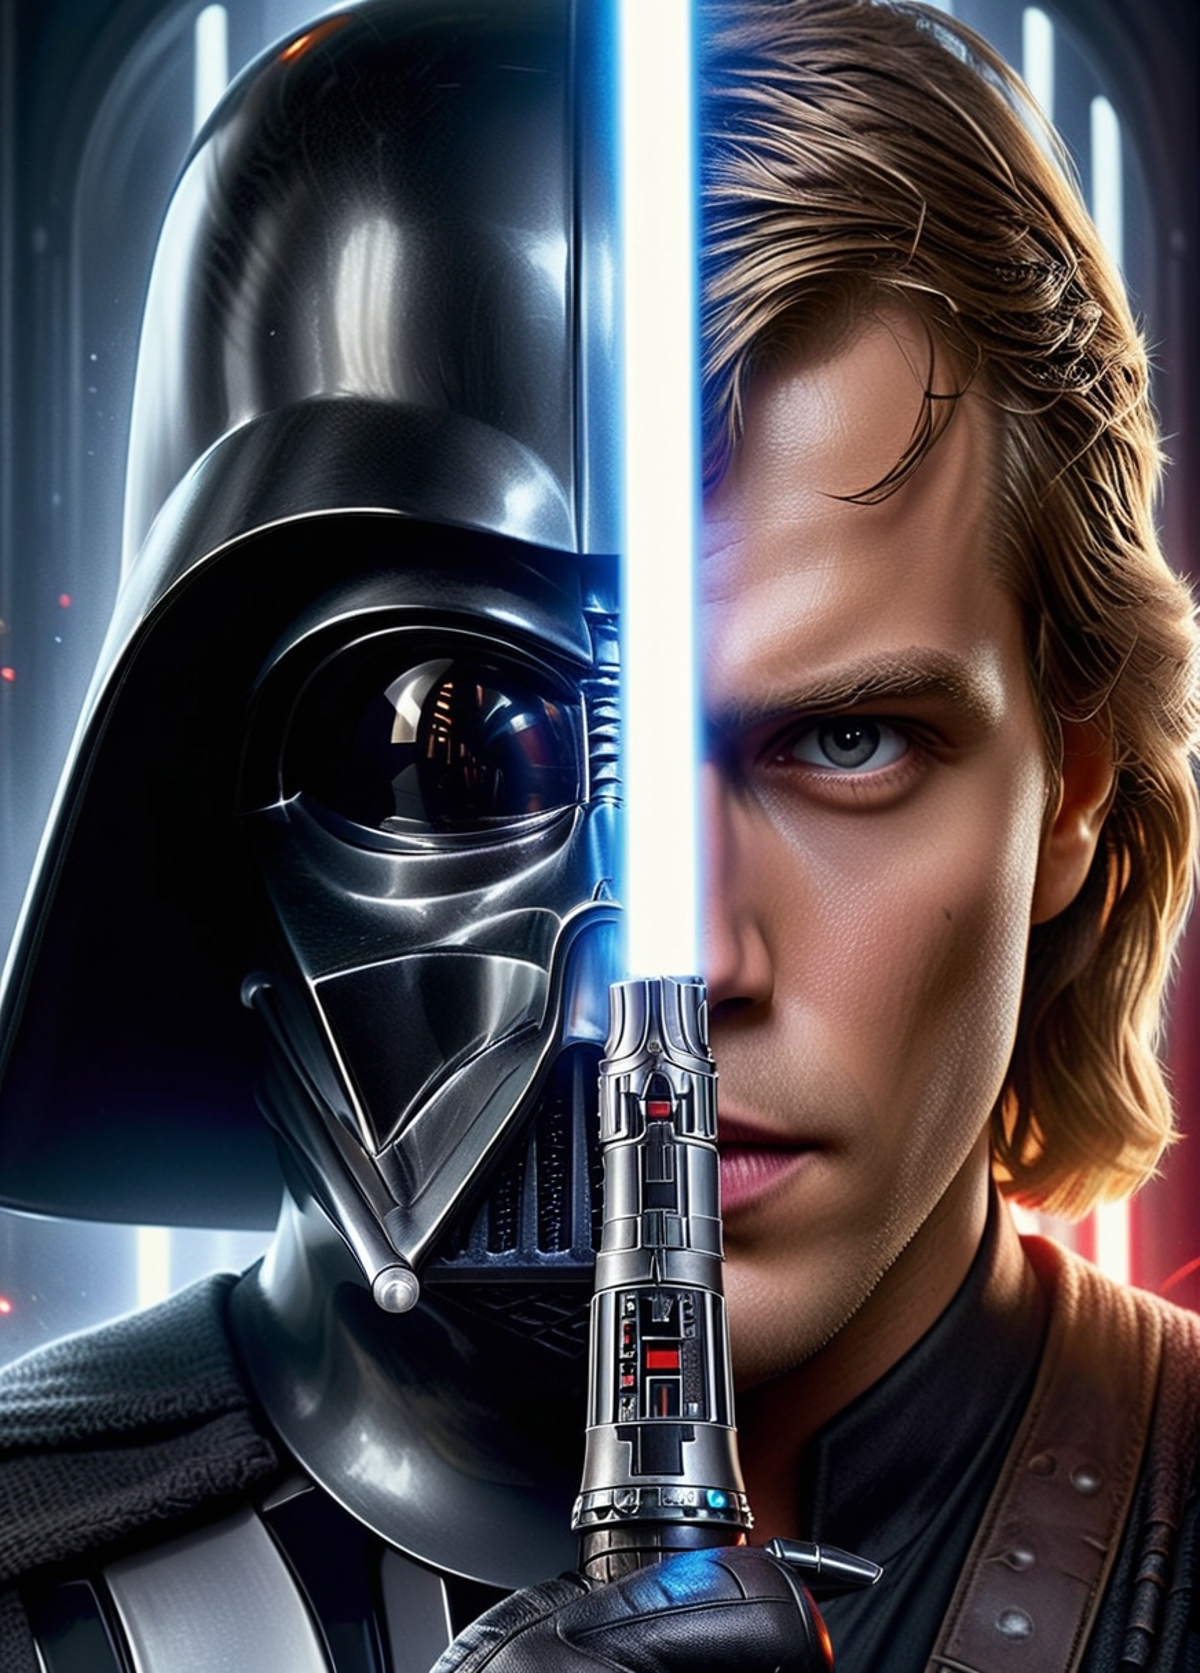 A colorful and detailed image of a man with a lightsaber and Darth Vader.